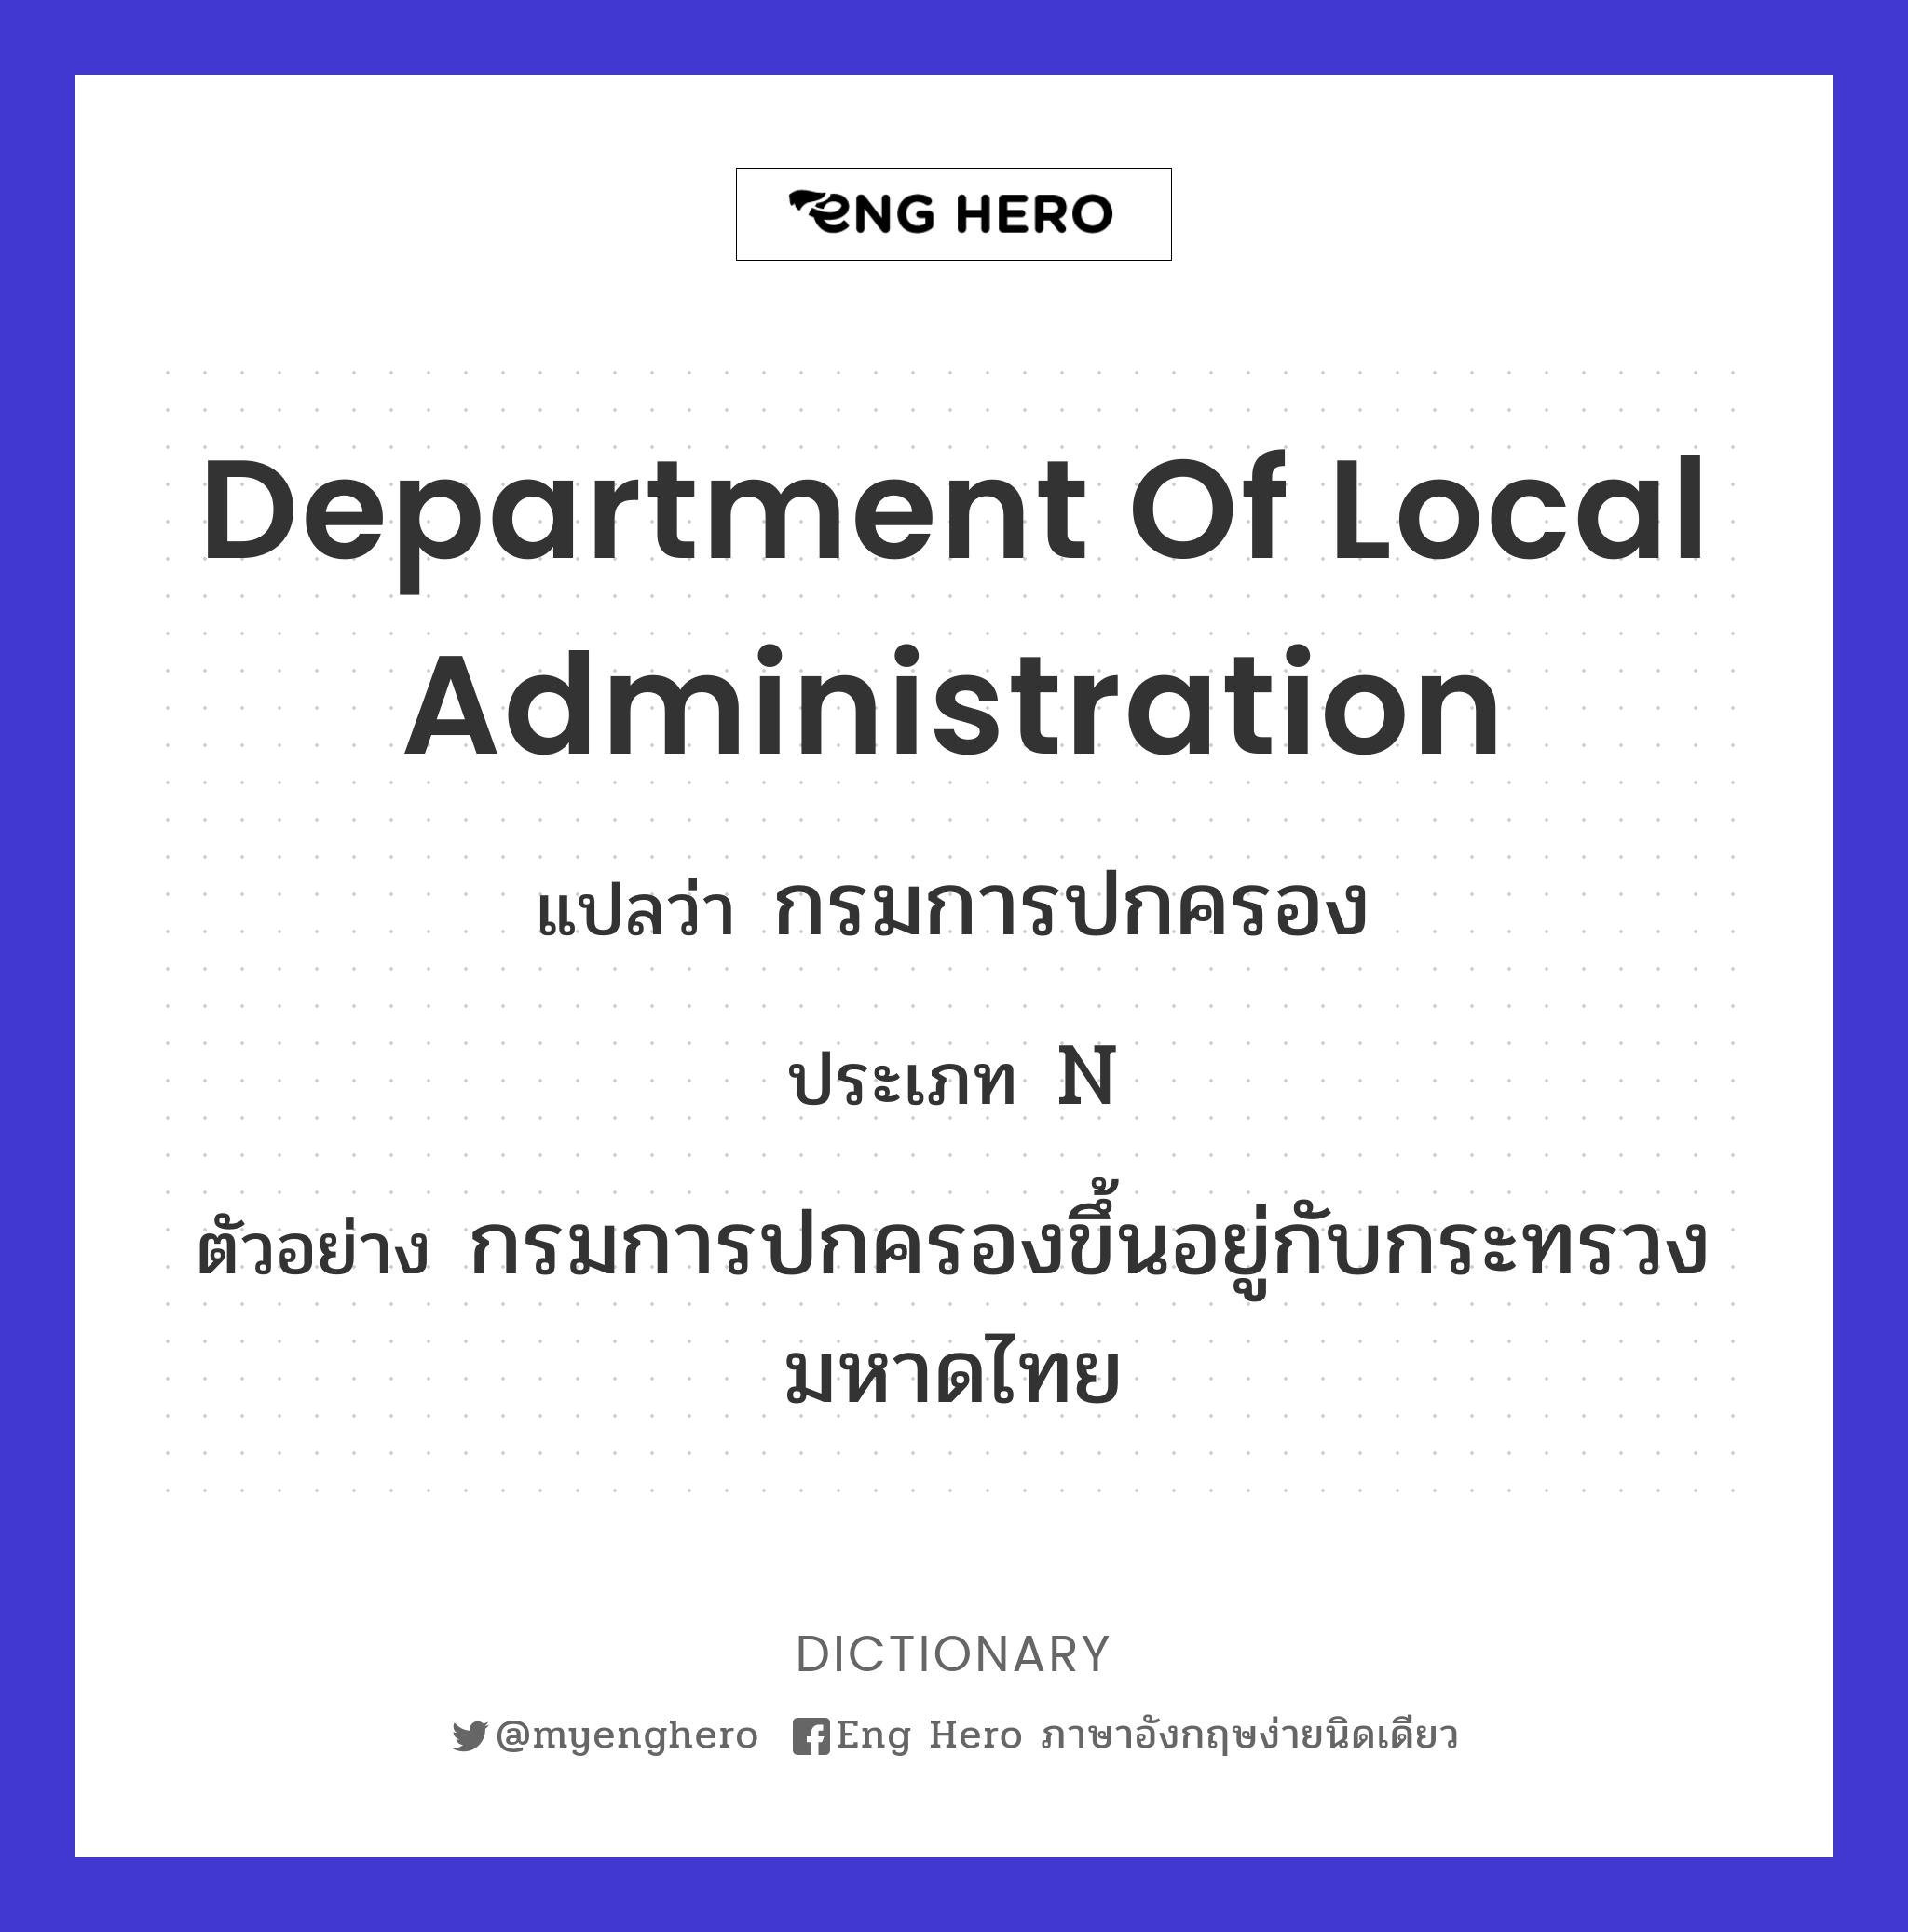 Department of Local Administration